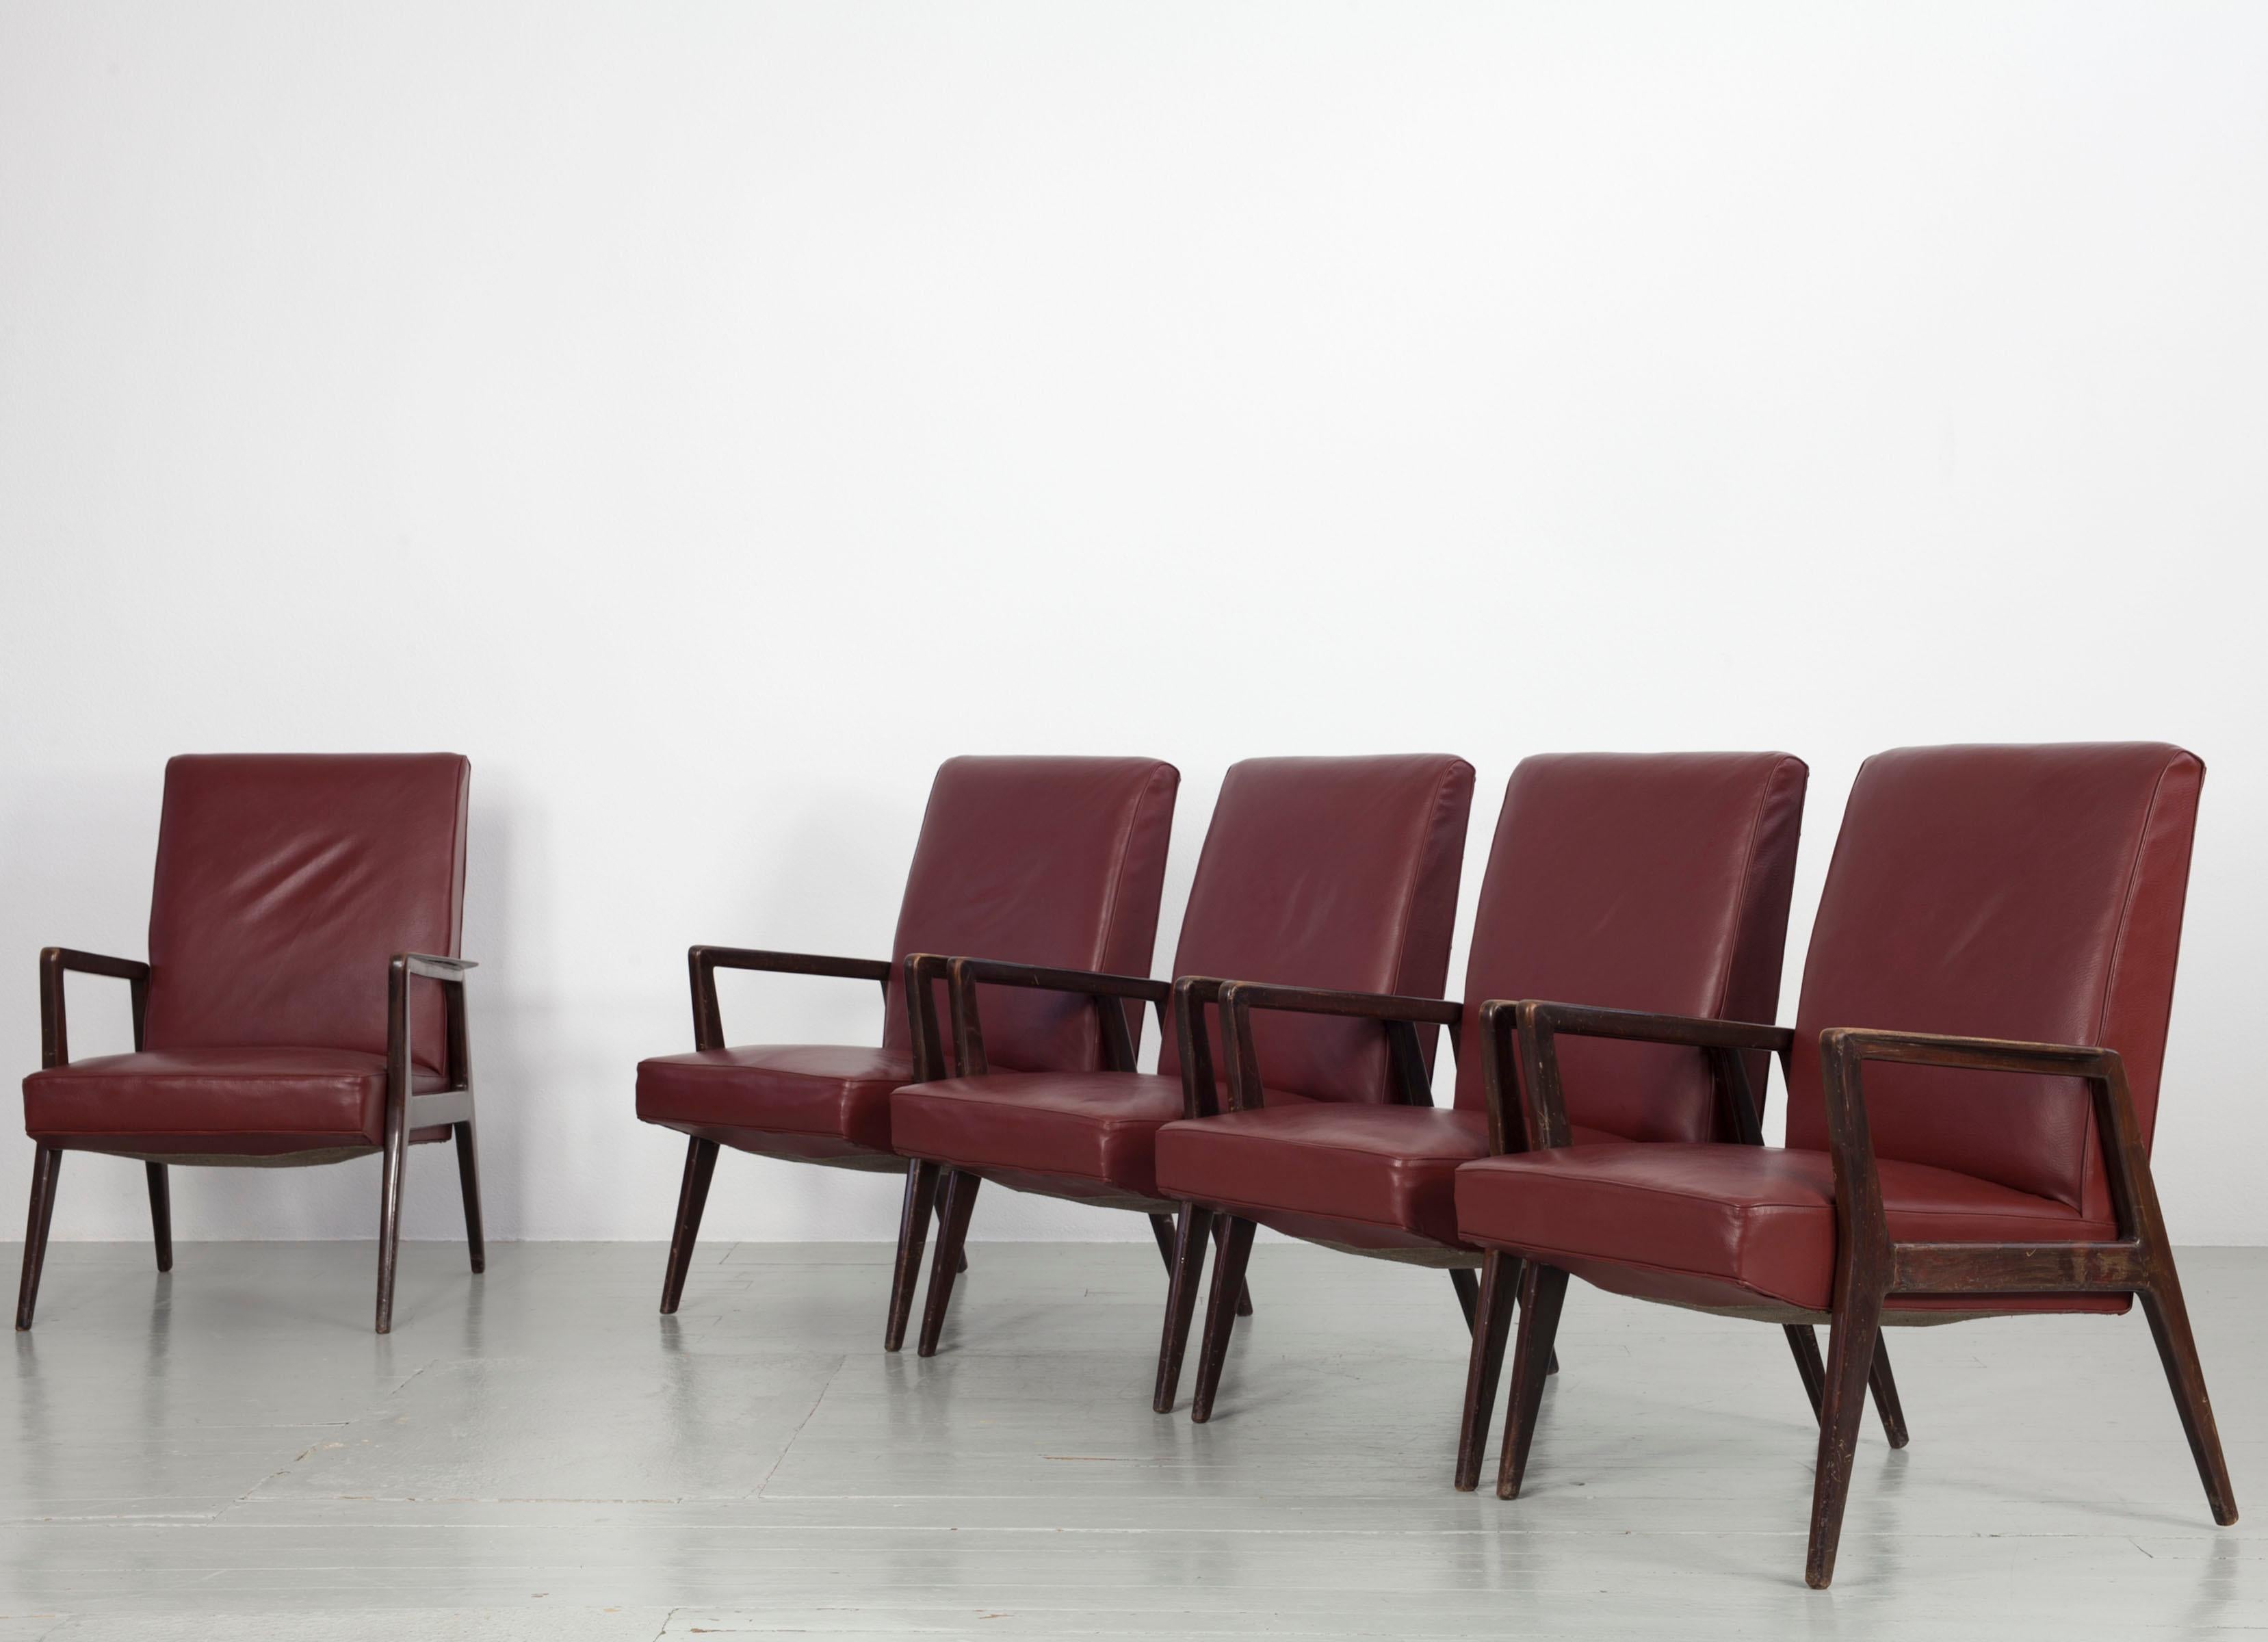 Set of 5 Dark Red Leatherette Armchairs, Italy 1960s For Sale 1